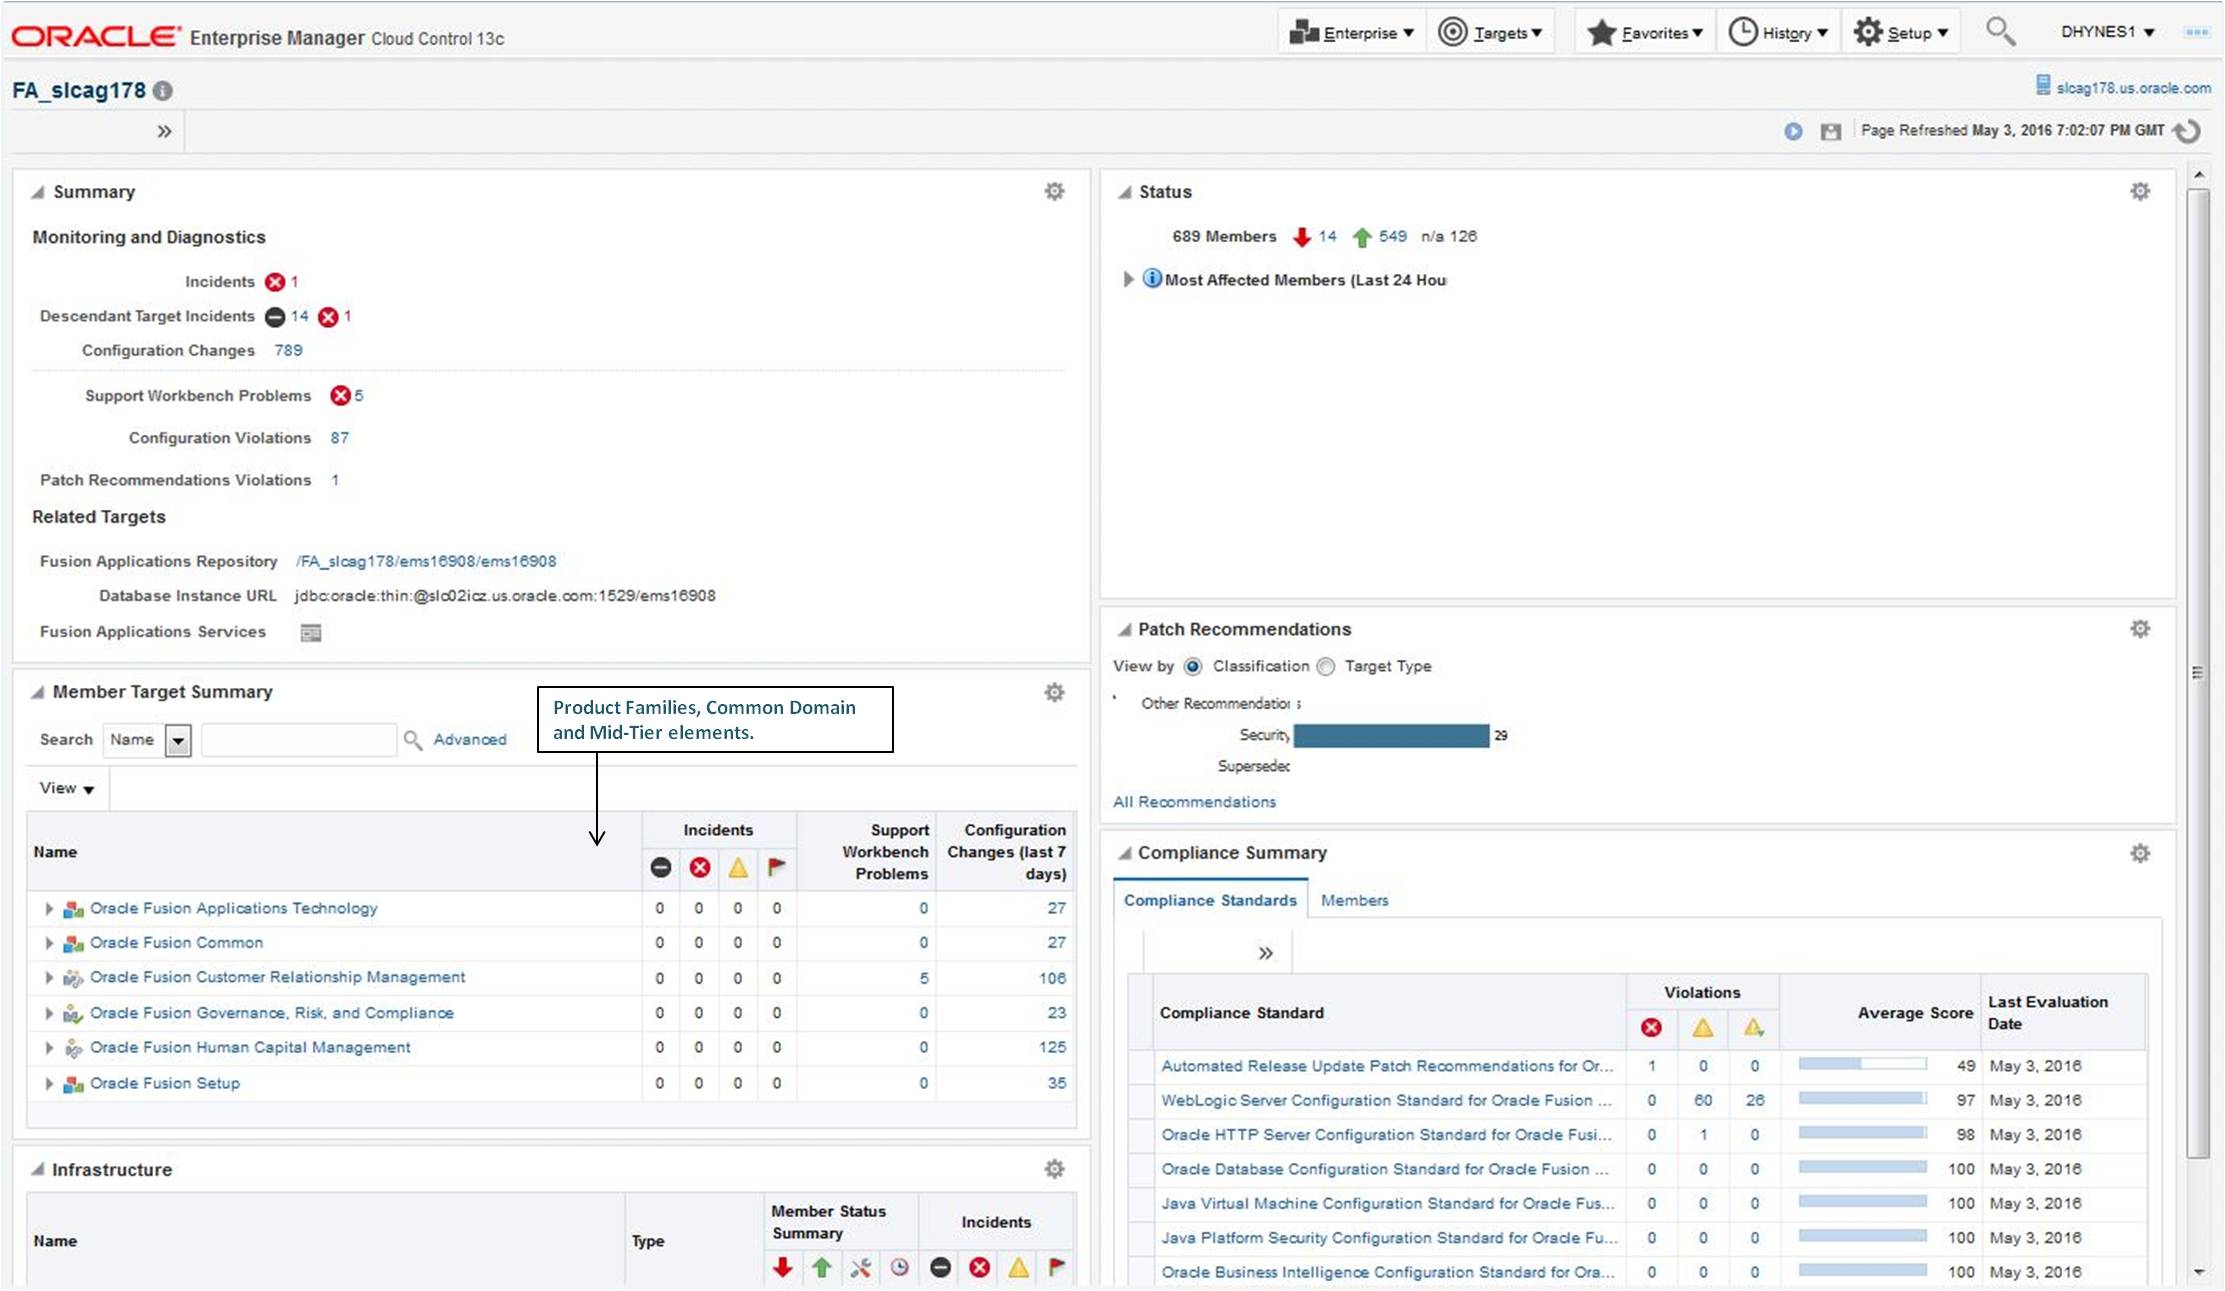 Screenshot of the Fusion Instance Home Page in Enterprise Manager Cloud Control